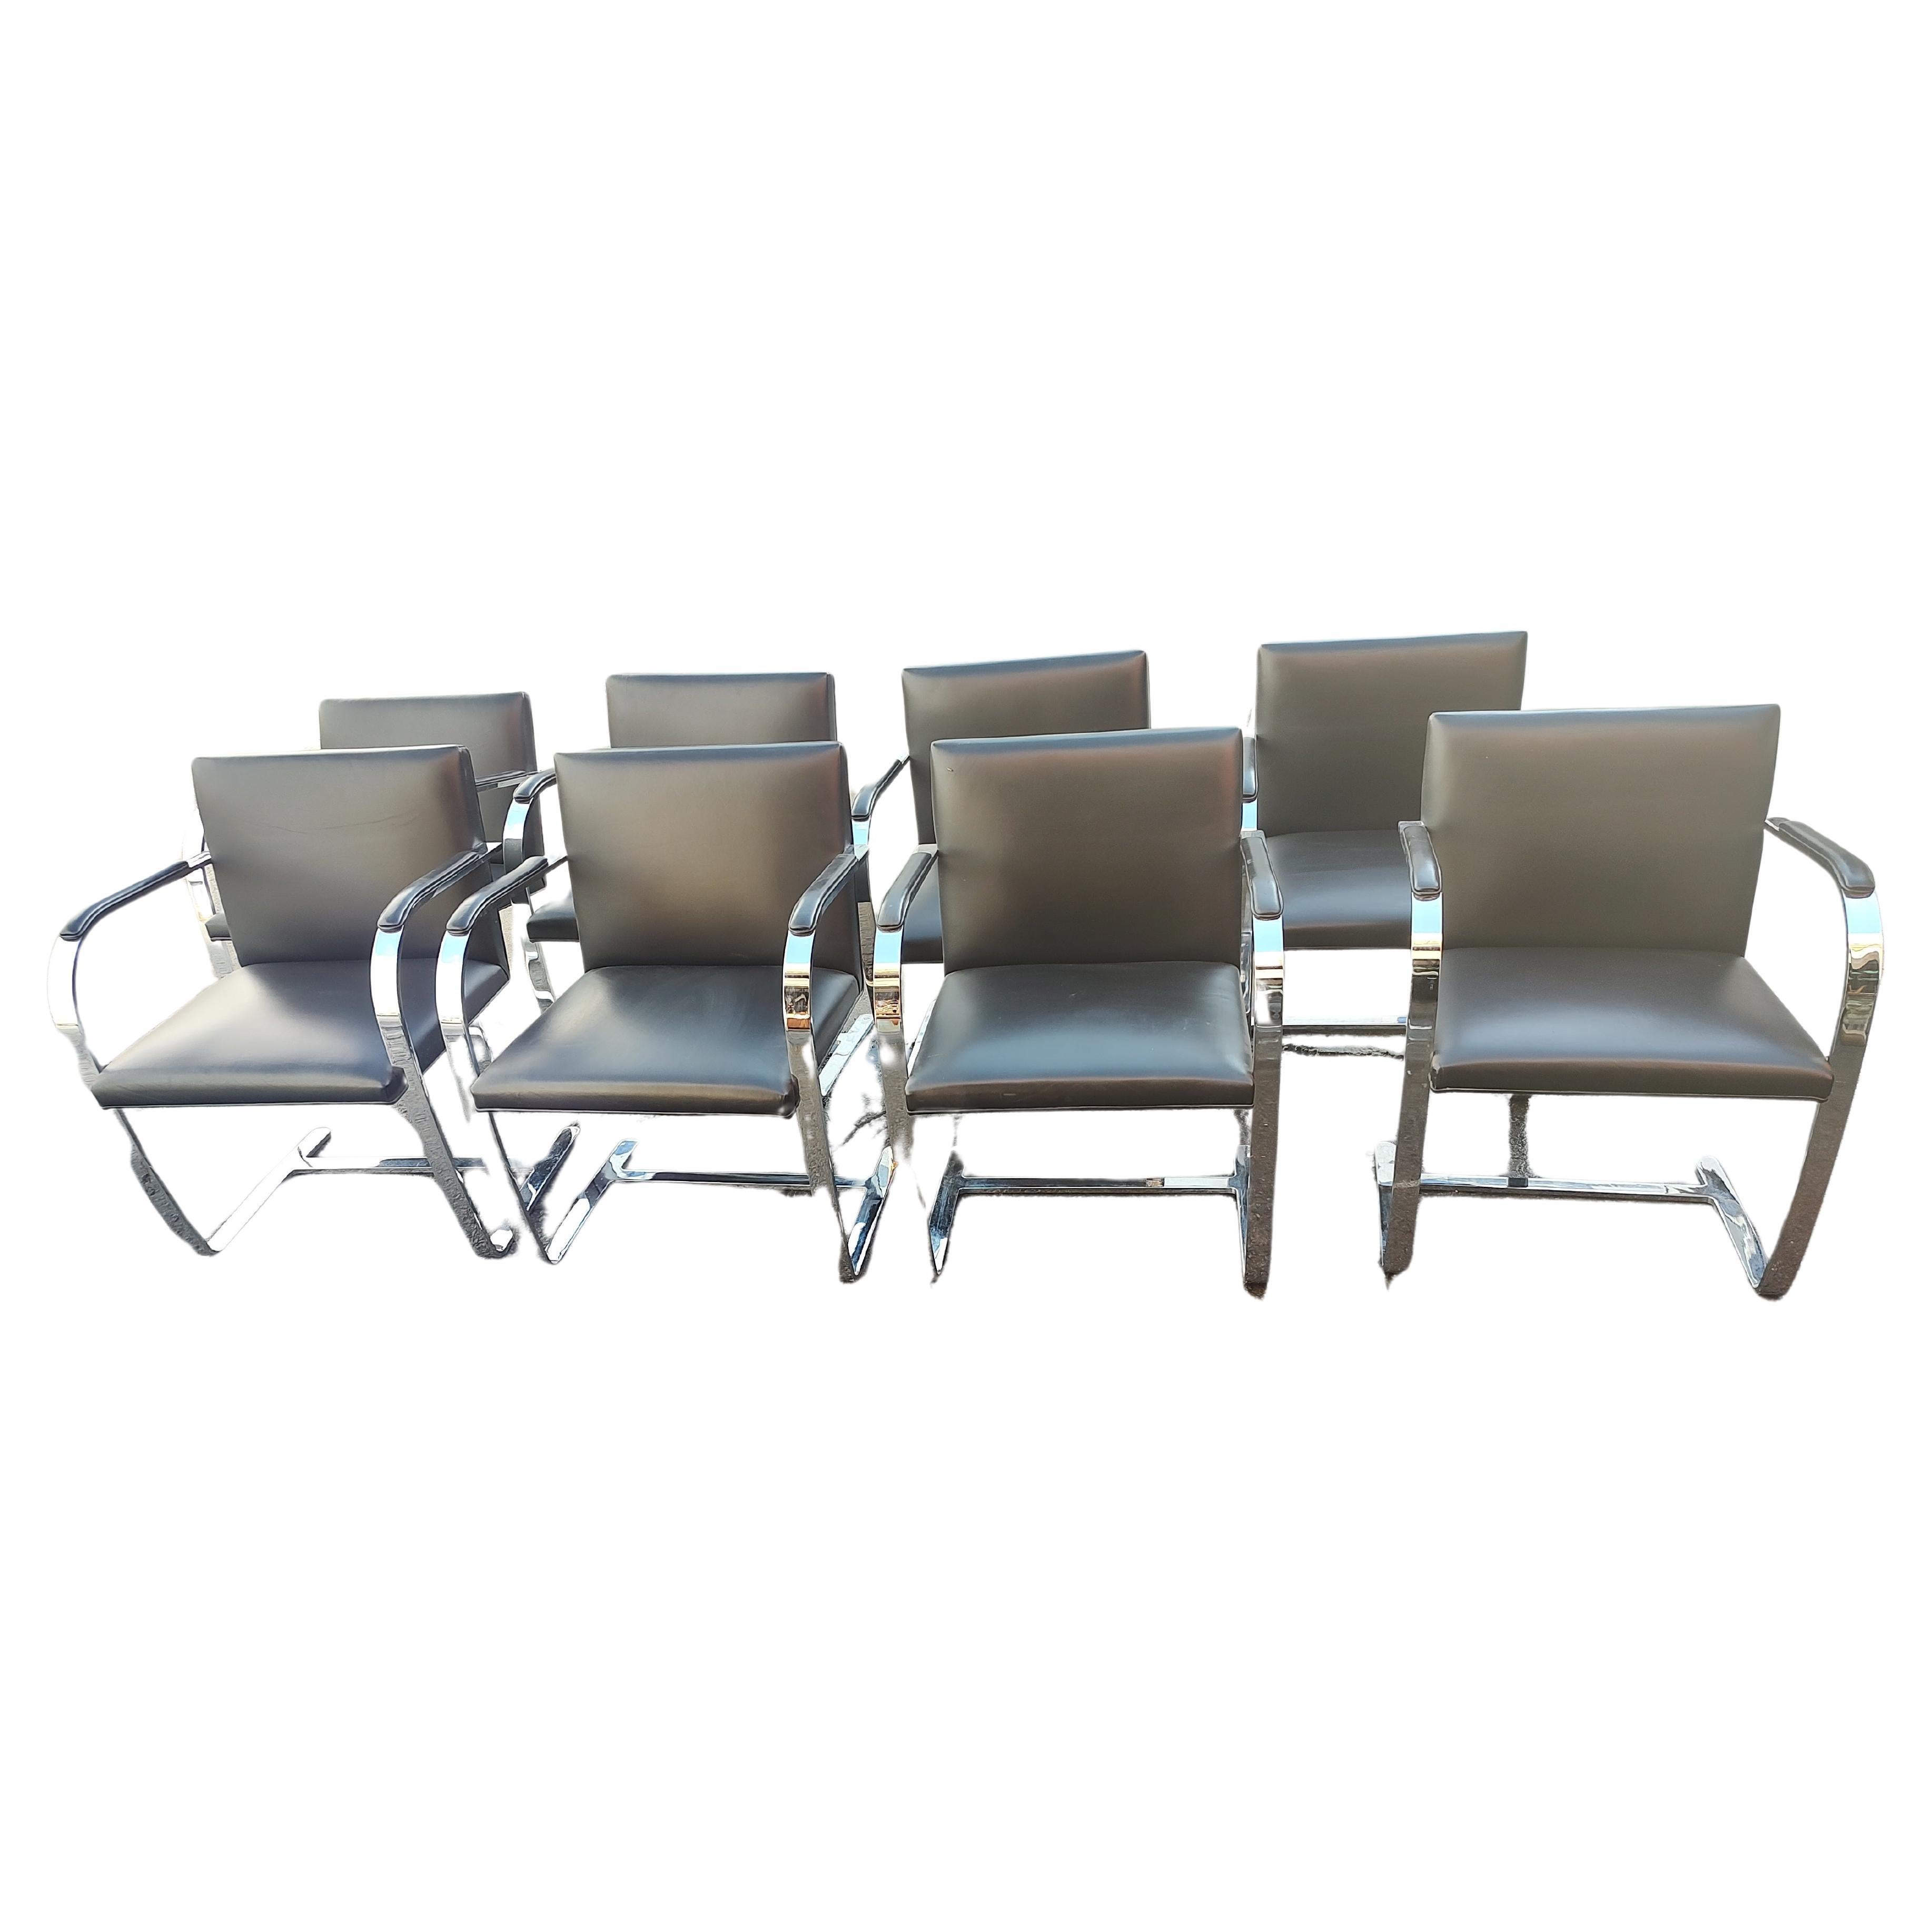 Late 20th Century Set of 8 Knoll Black Leather Flat Bar Brno Chairs by Ludwig Mies van der Rohe  For Sale